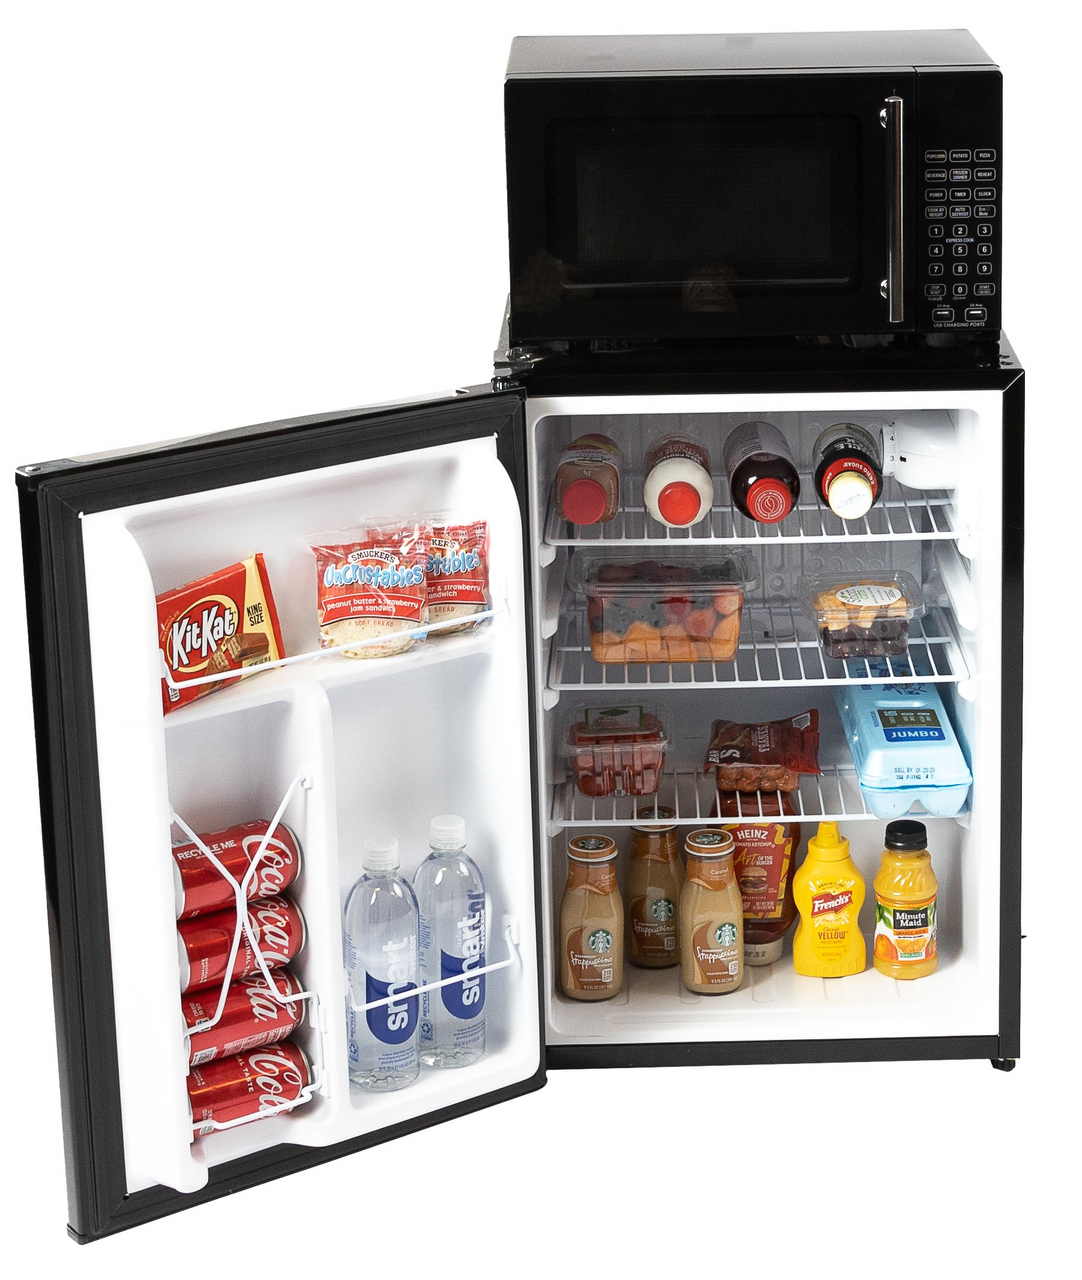 Best Microwaves and Refrigerators